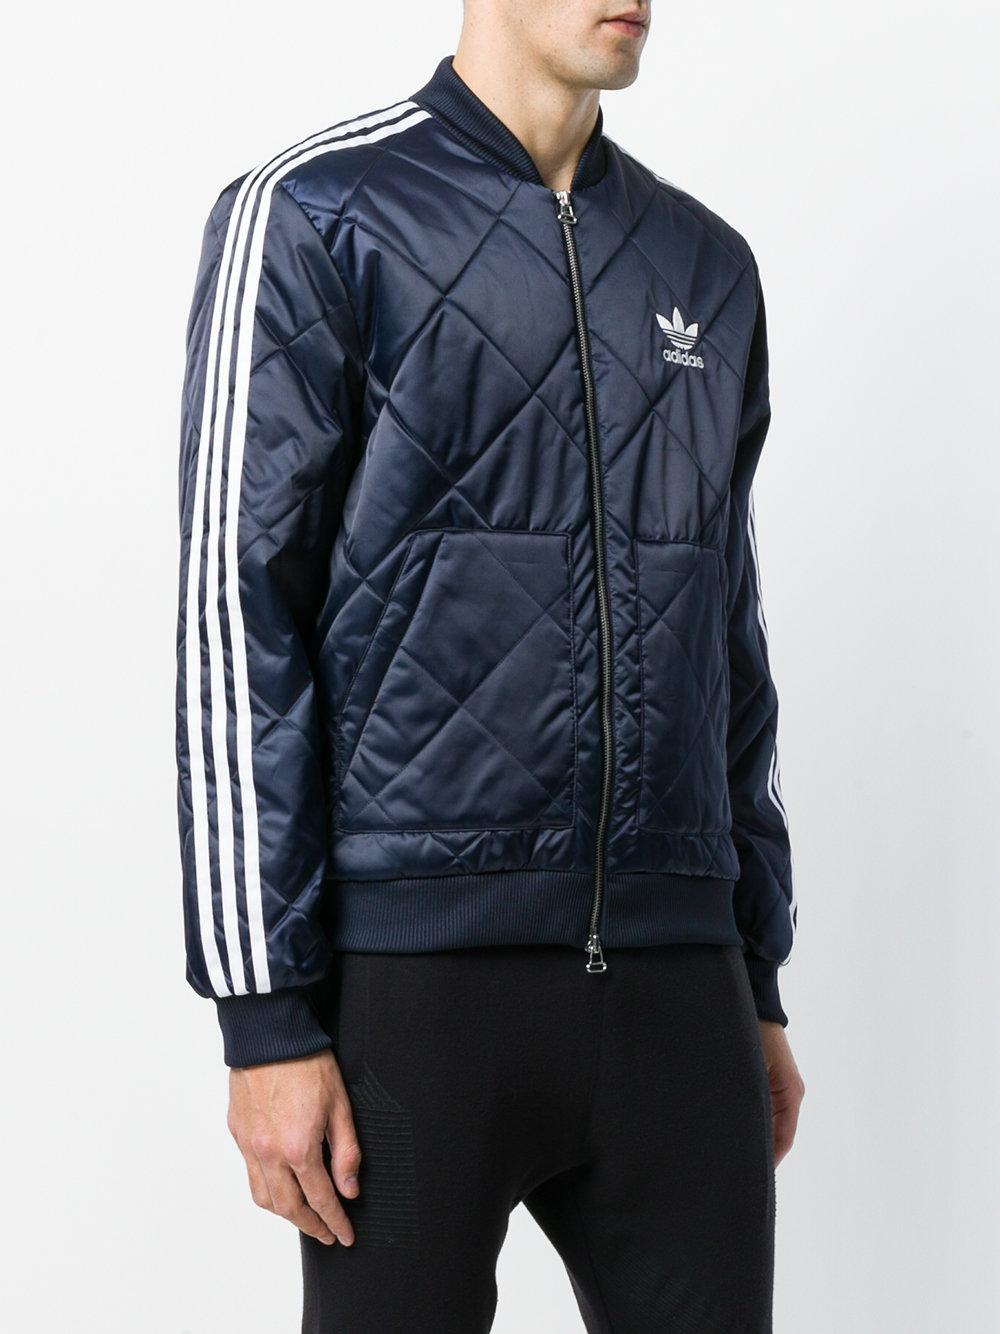 adidas Originals Sst Quilted Pre Jacket in Blue for Men - Lyst